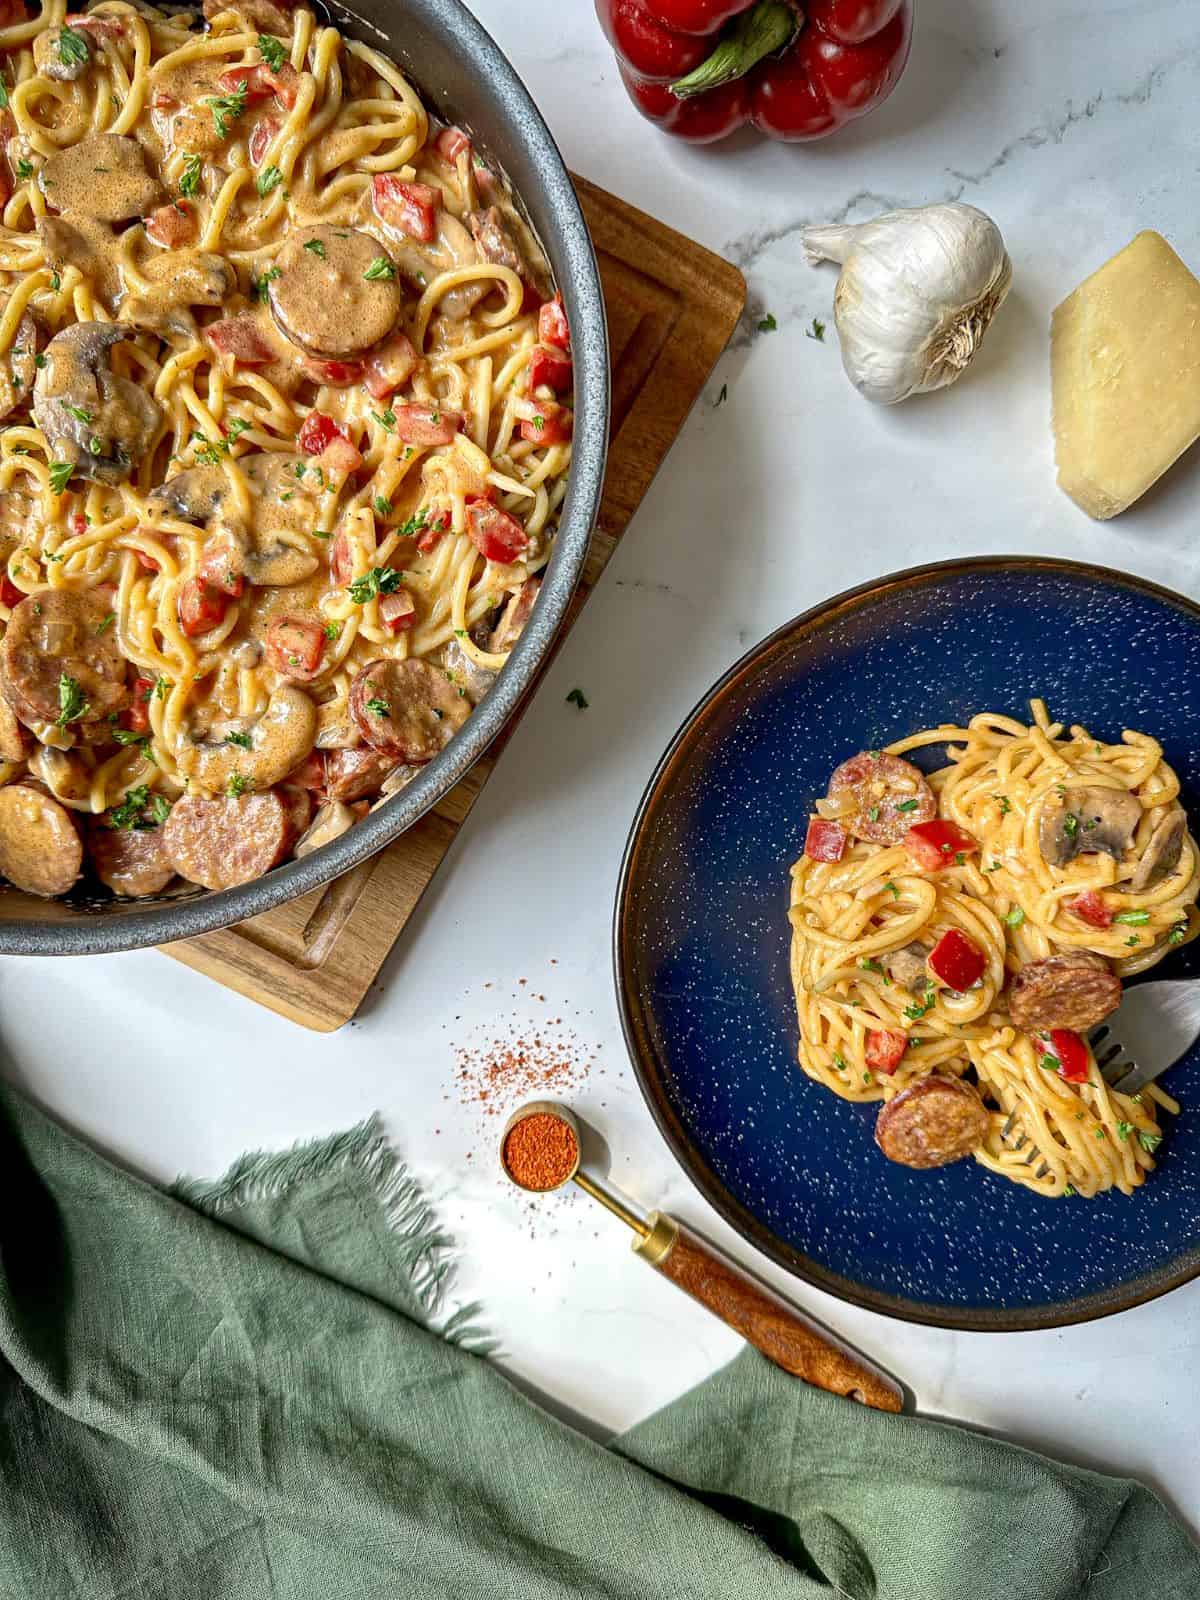 A skillet full of Cajun spaghetti with sausage, peppers, and mushrooms next to a blue plate with a serving size and fork.